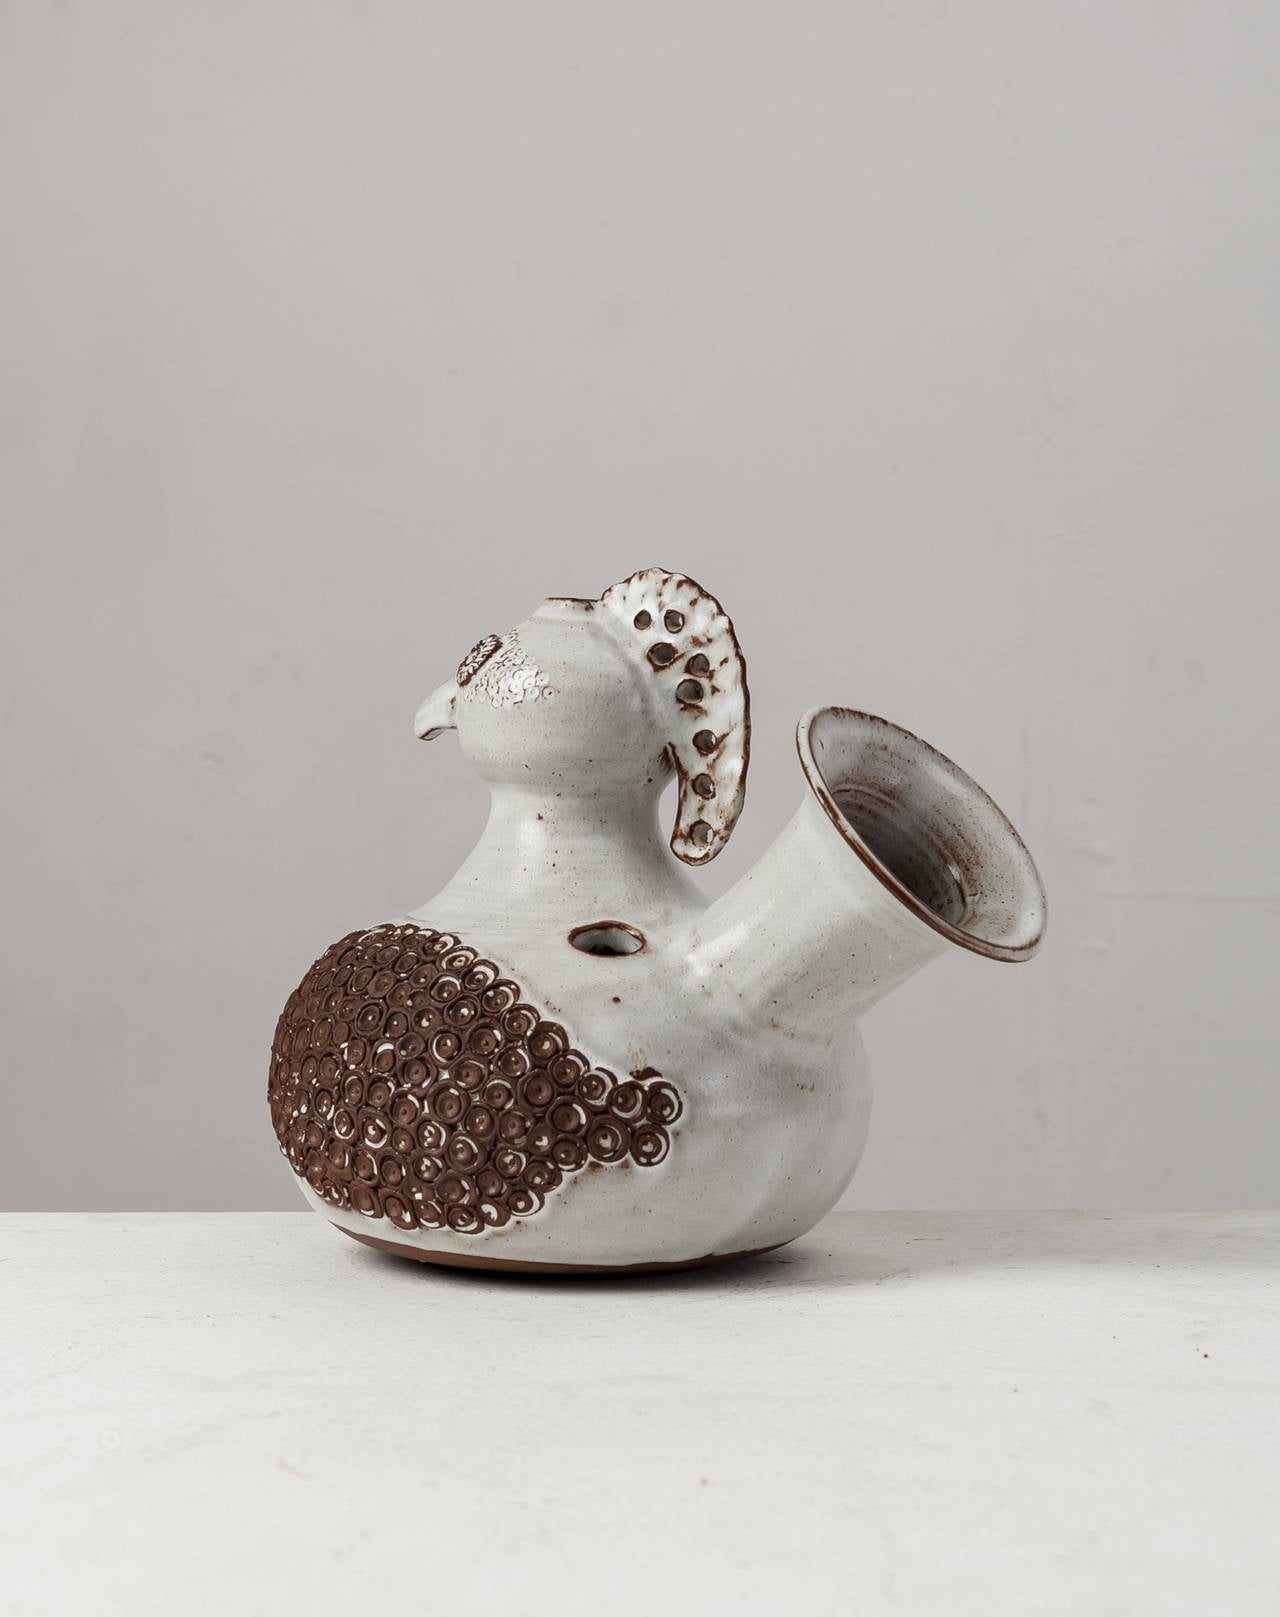 A white and brown ceramic vase in the shape of a hen. This piece is signed by Pouchain and is in a perfect condition.

Pouchain is a French sculptor and ceramist and the son of Jacques Pouchain.